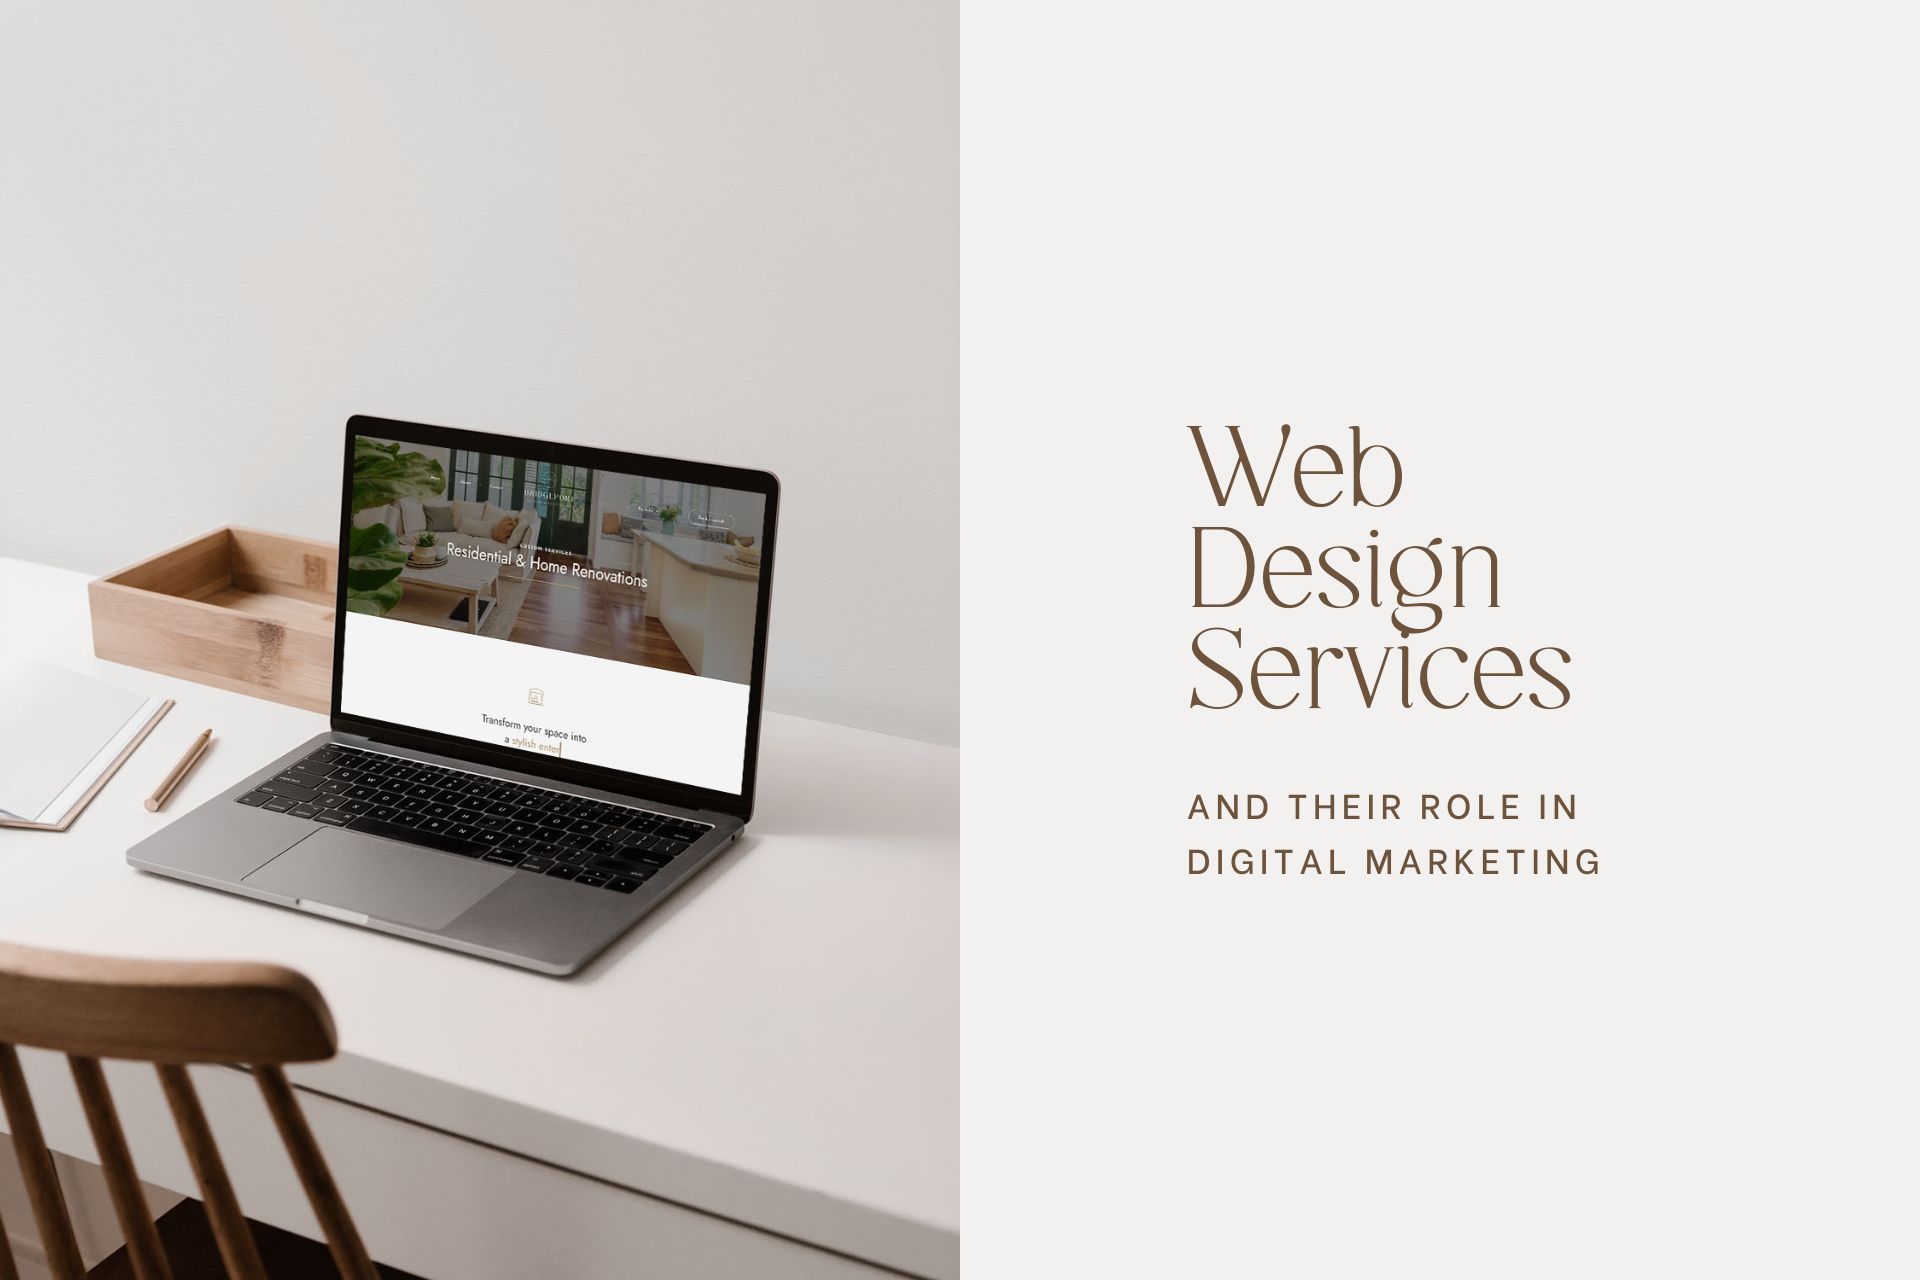 web design services and their role in digital marketing